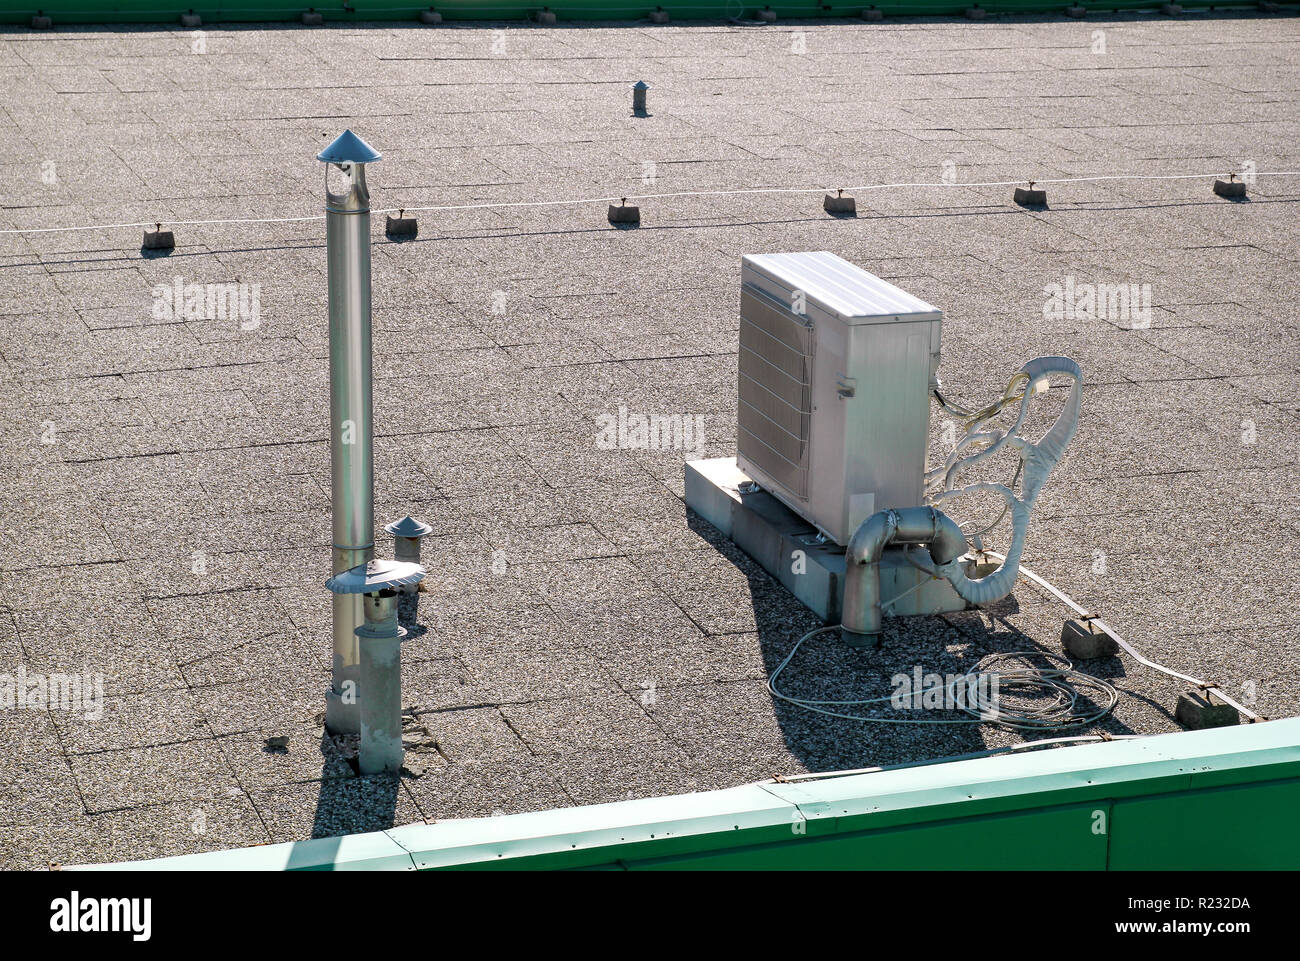 Air conditioning system assembled on top of a building / Air vents on top of commercial building / Air cooled water chillers top of roof. Stock Photo